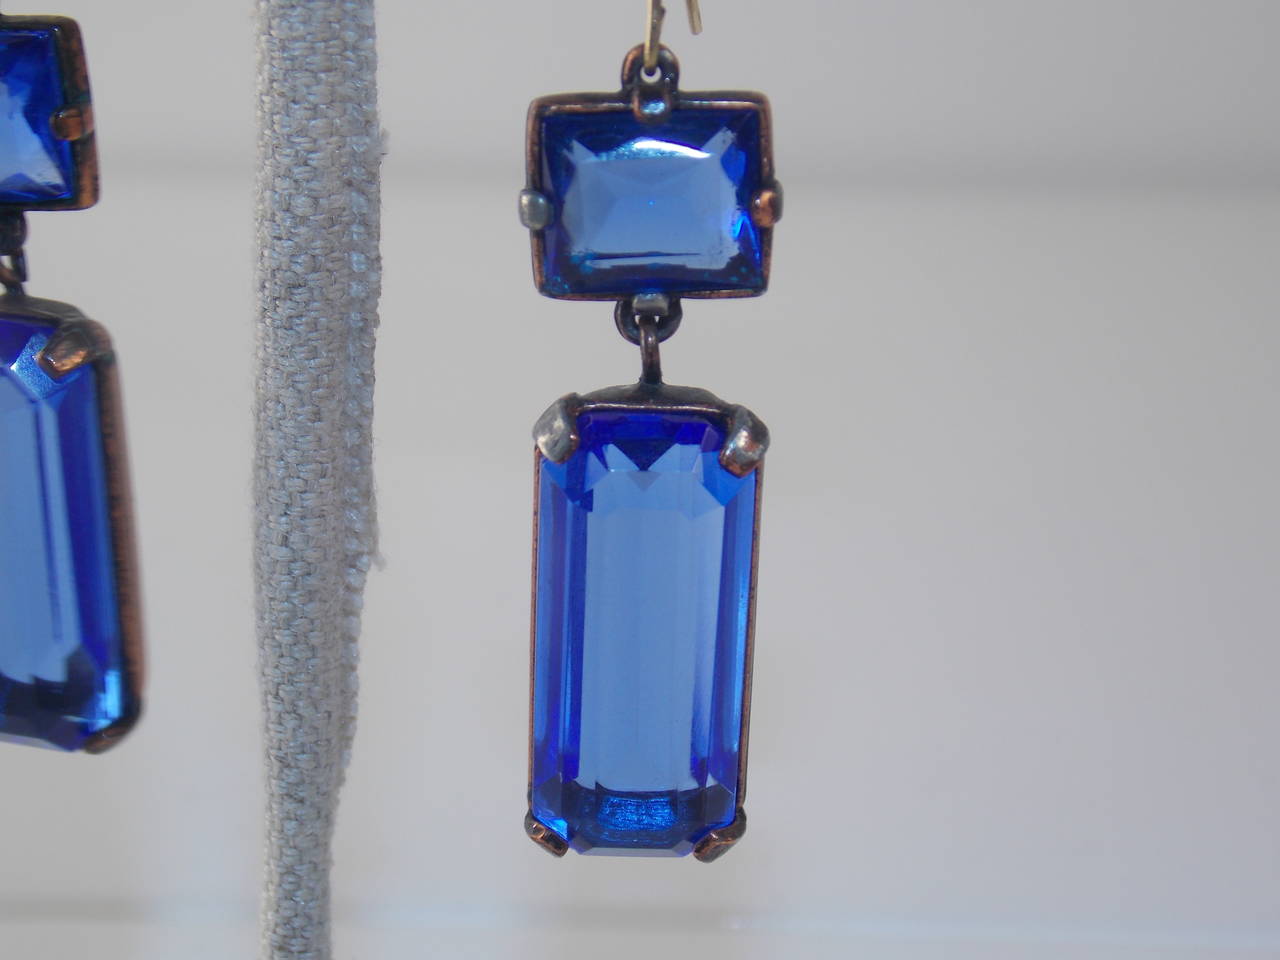 Yves Saint Laurent vintage crystal earrings in blue faceted crystal set in guilt brass metal. One of our favorite pieces as the blue crystal is absolutely stunning. This YSL piece takes you from day to formal in a flash; where them with jeans and a